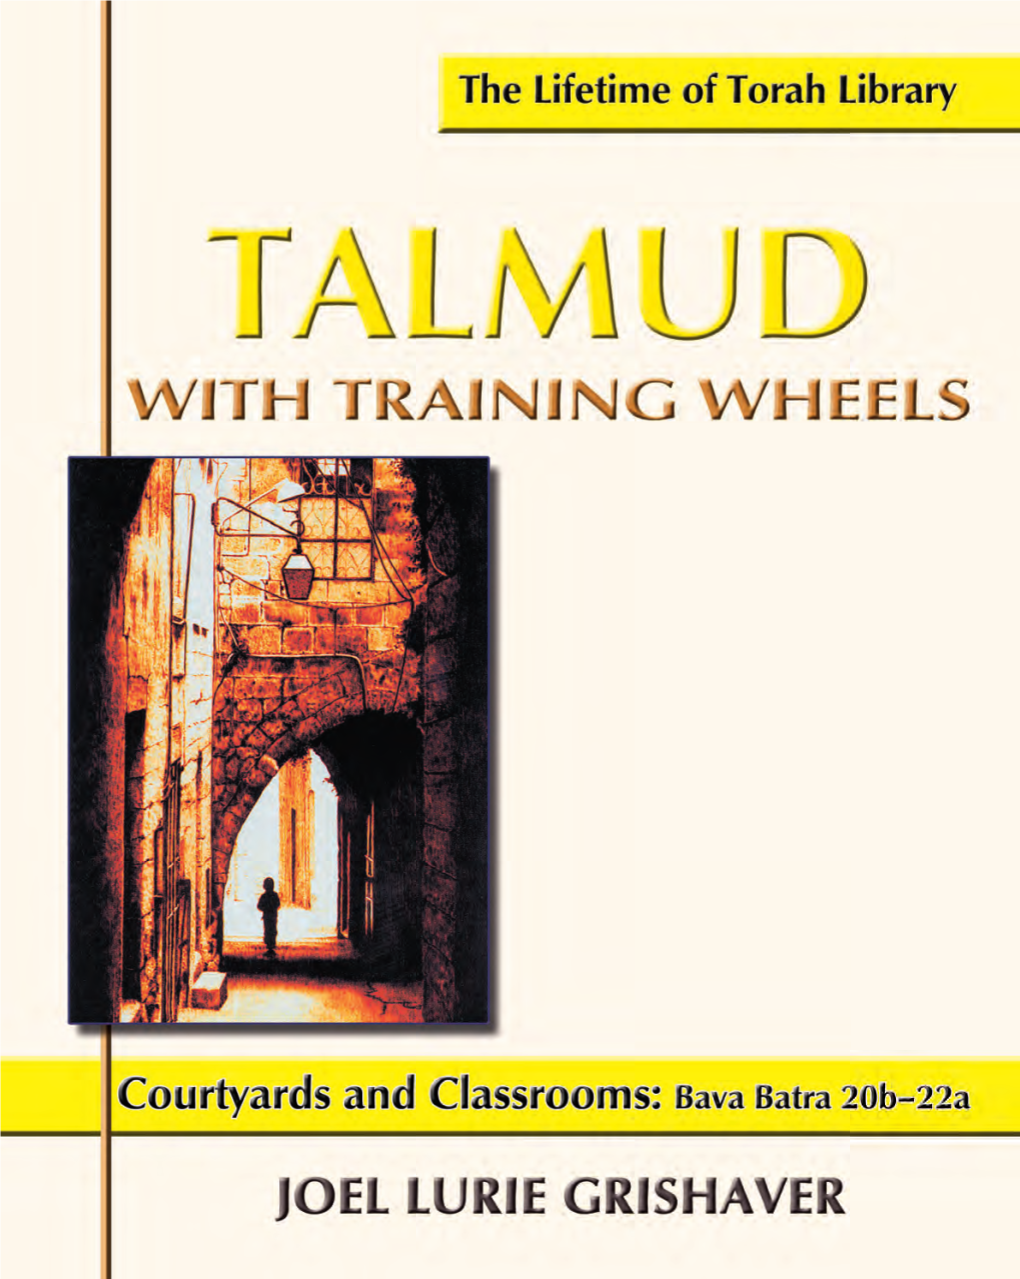 Talmud with Courtyards and Classrooms Sample